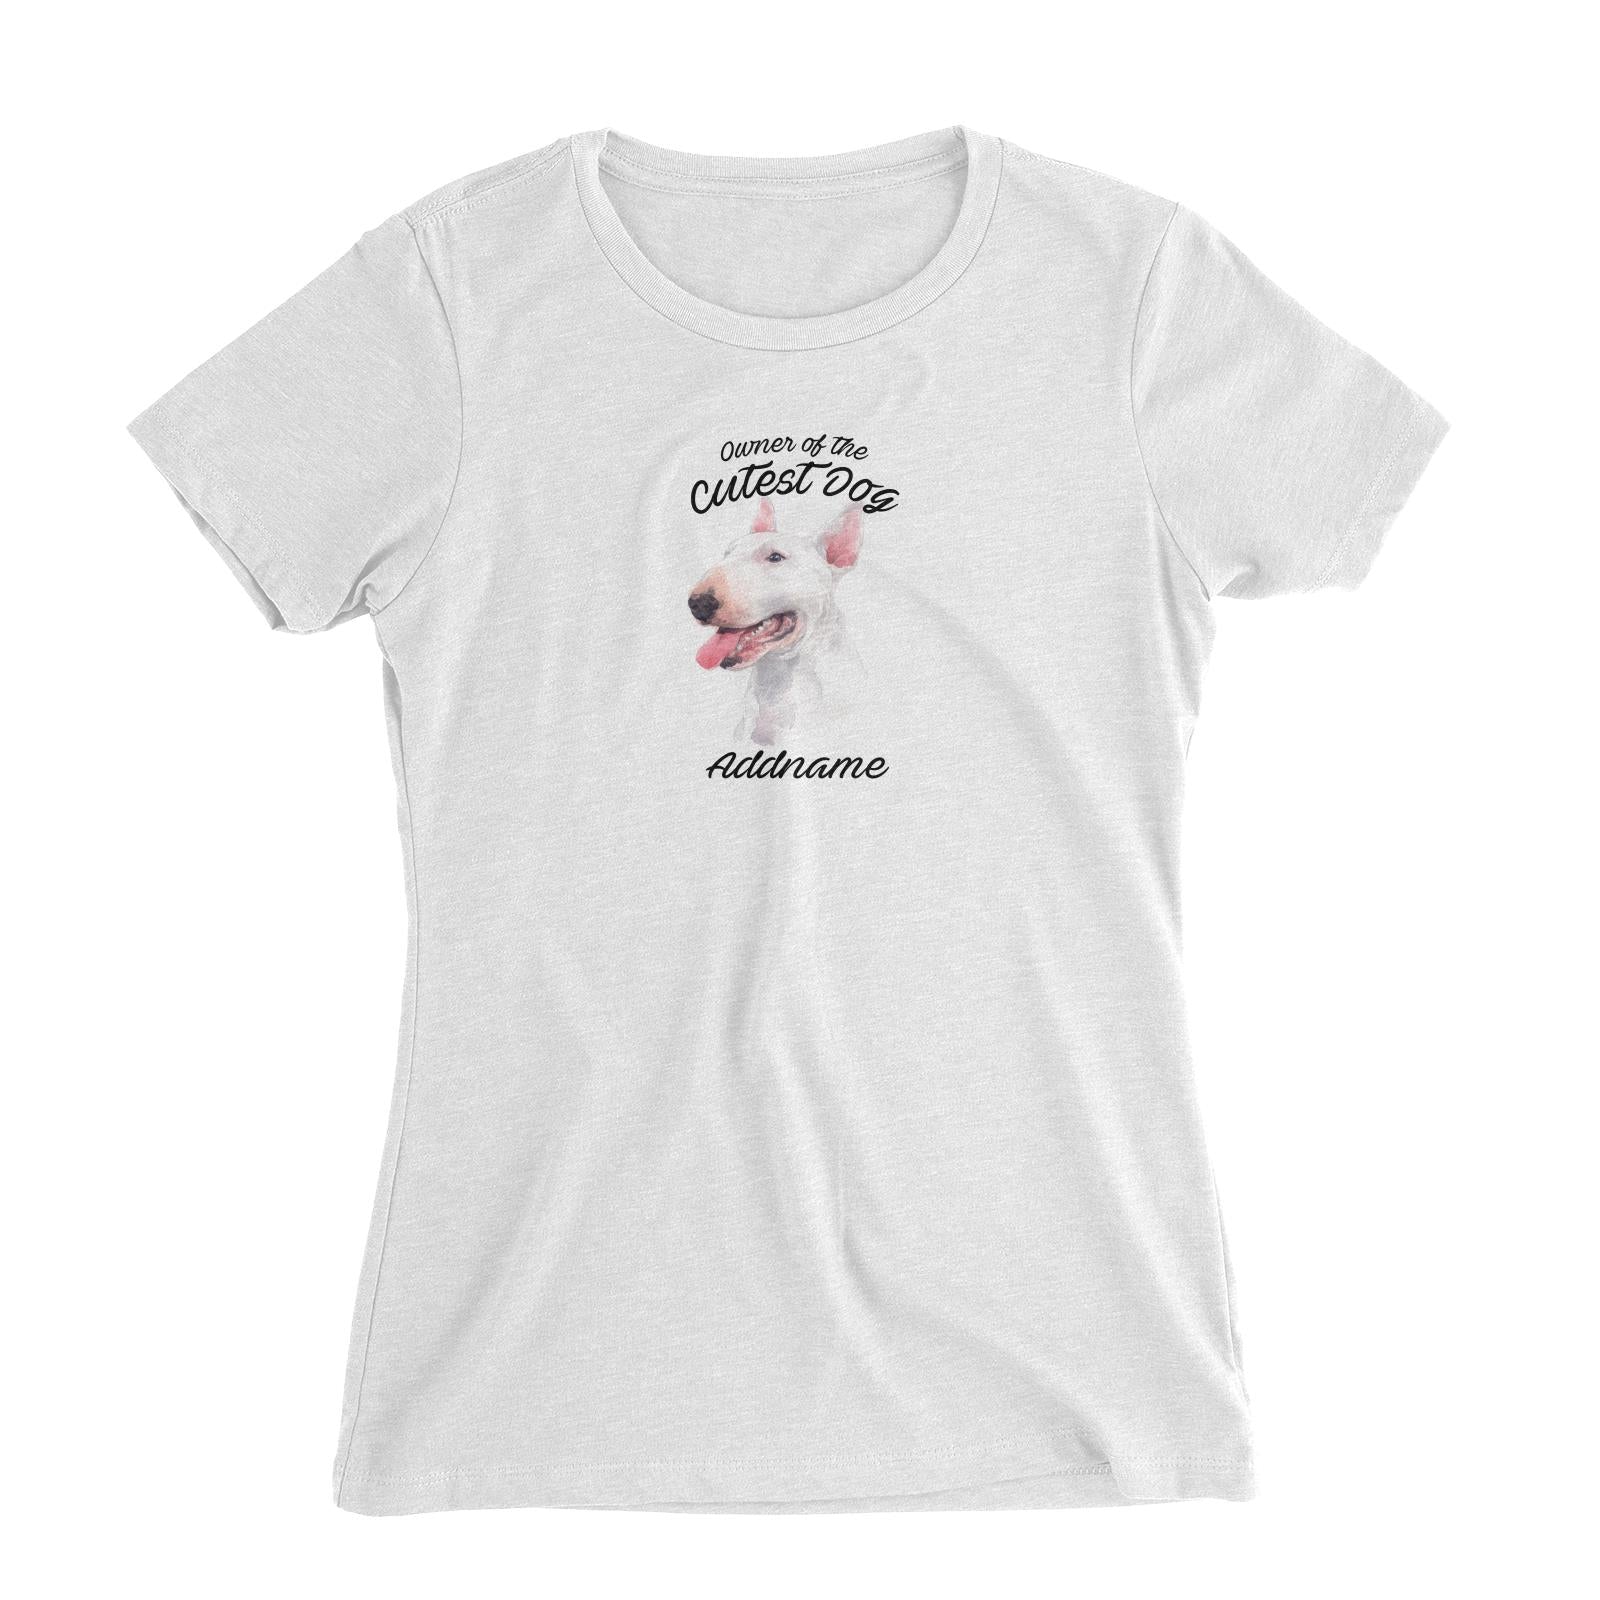 Watercolor Dog Owner Of The Cutest Dog Bull Terrier Addname Women's Slim Fit T-Shirt